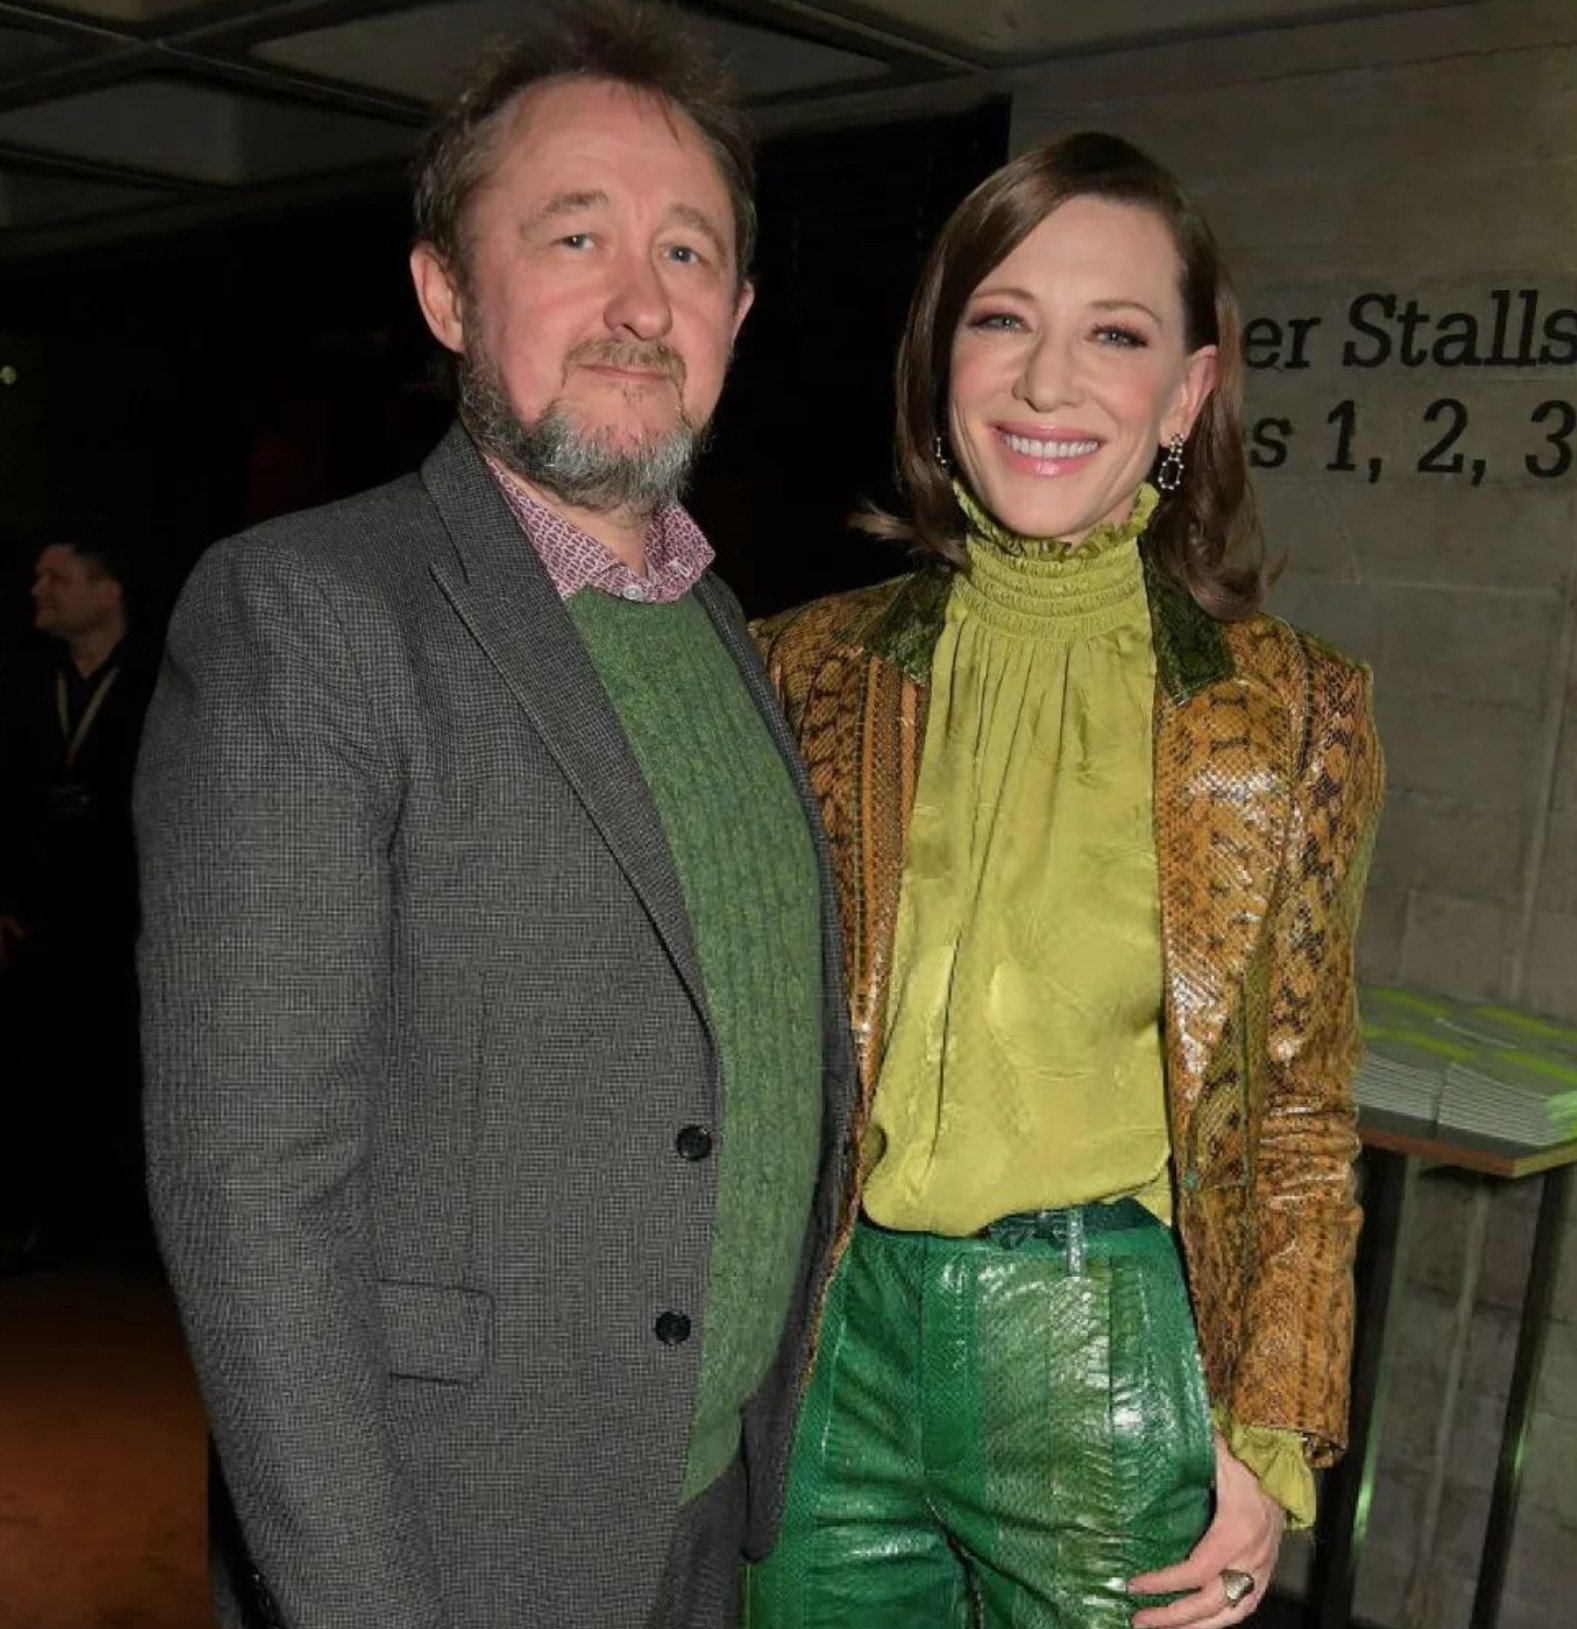 Cate Blanchett and Andrew Upton haven’t been seen in public together since last summer. Photo: @cate.eblanchett/Instagram 